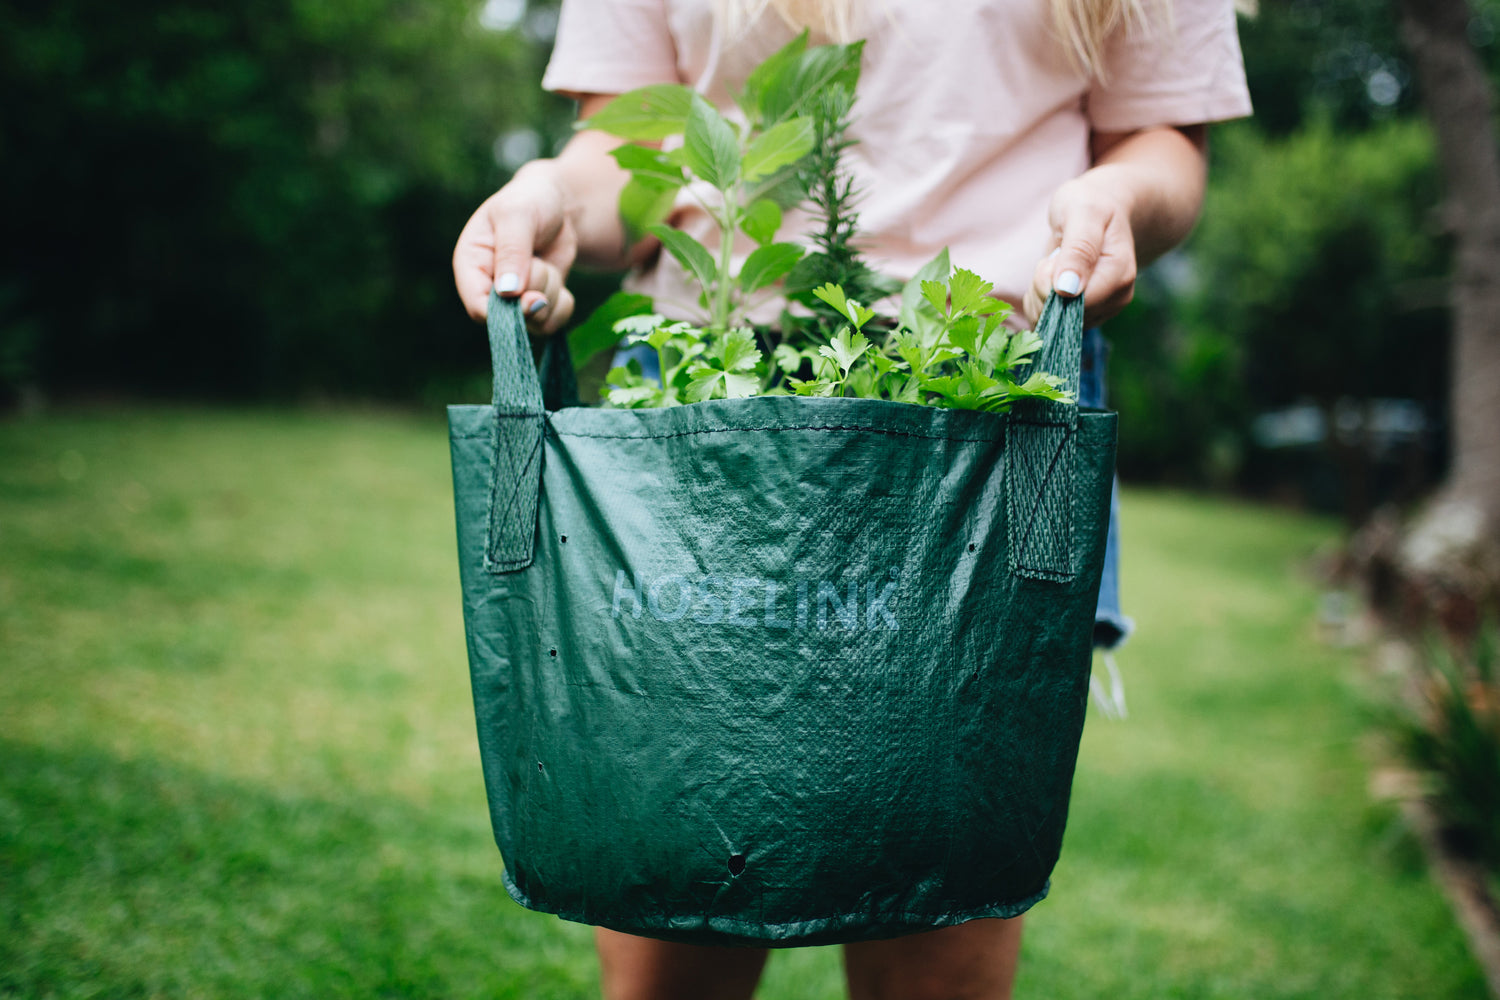 woman holding planter bag full of herbs on a lawn